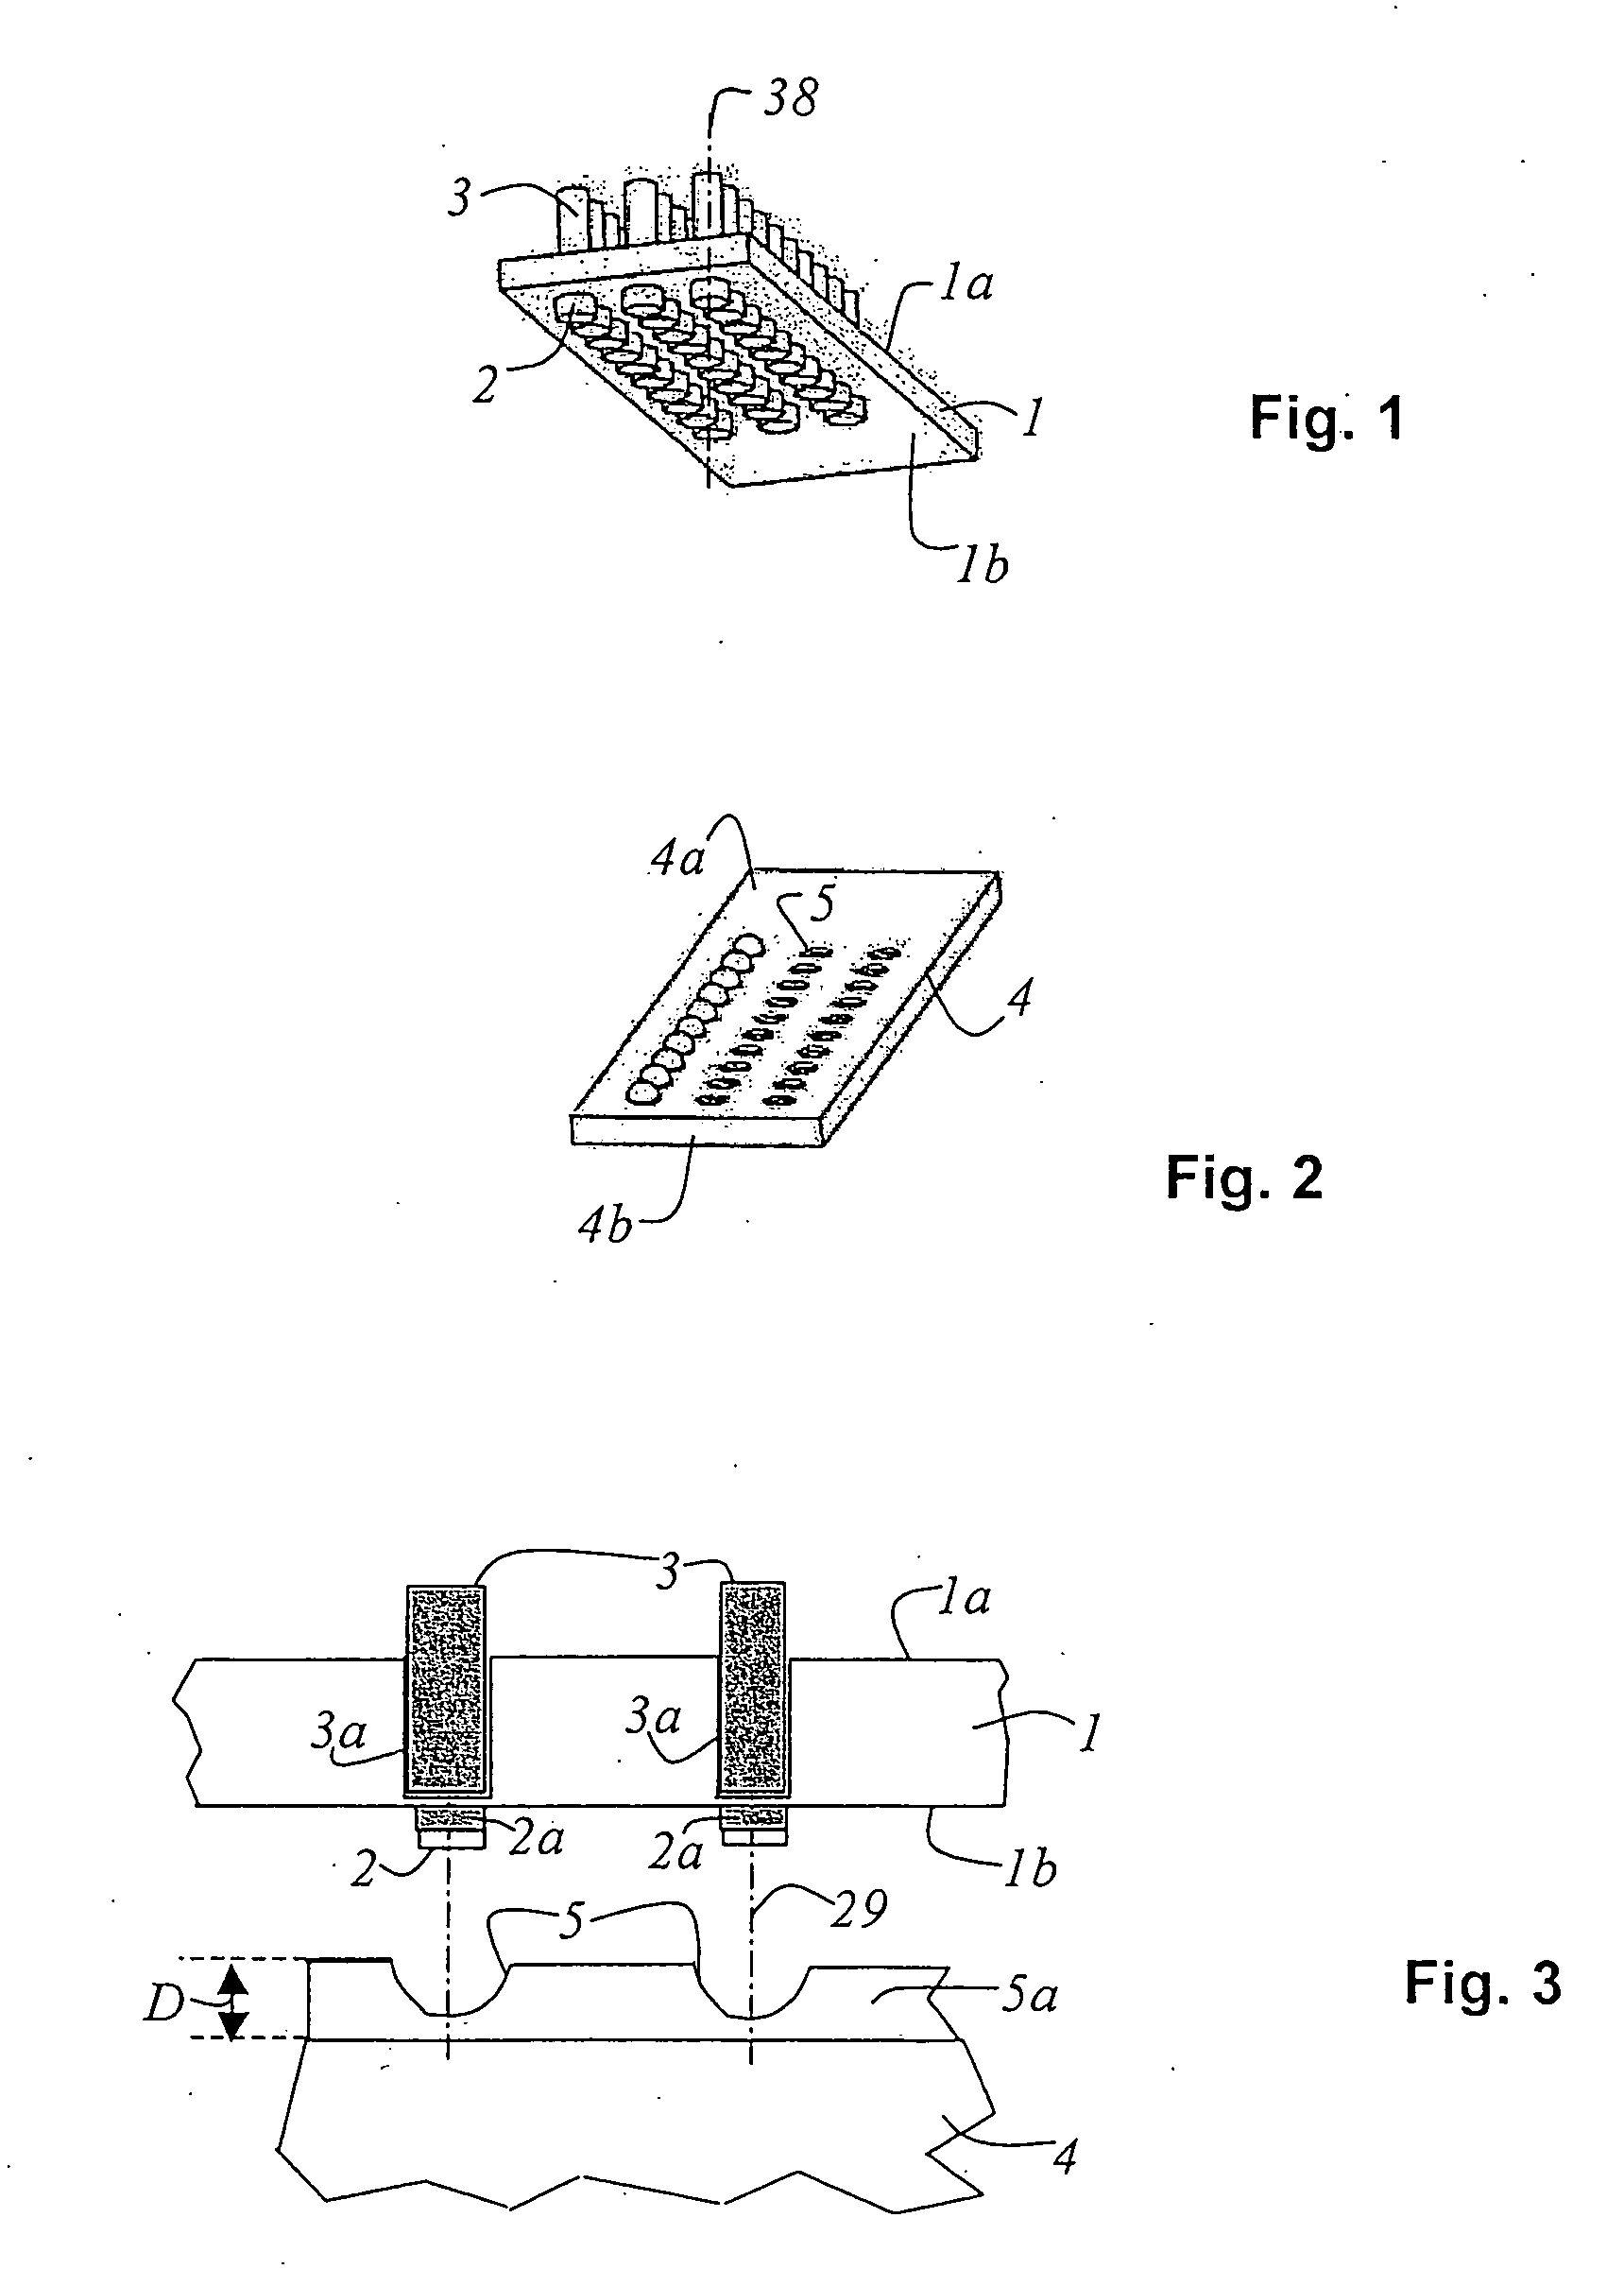 Apparatus and method for immunological labeling for thin tissue sections